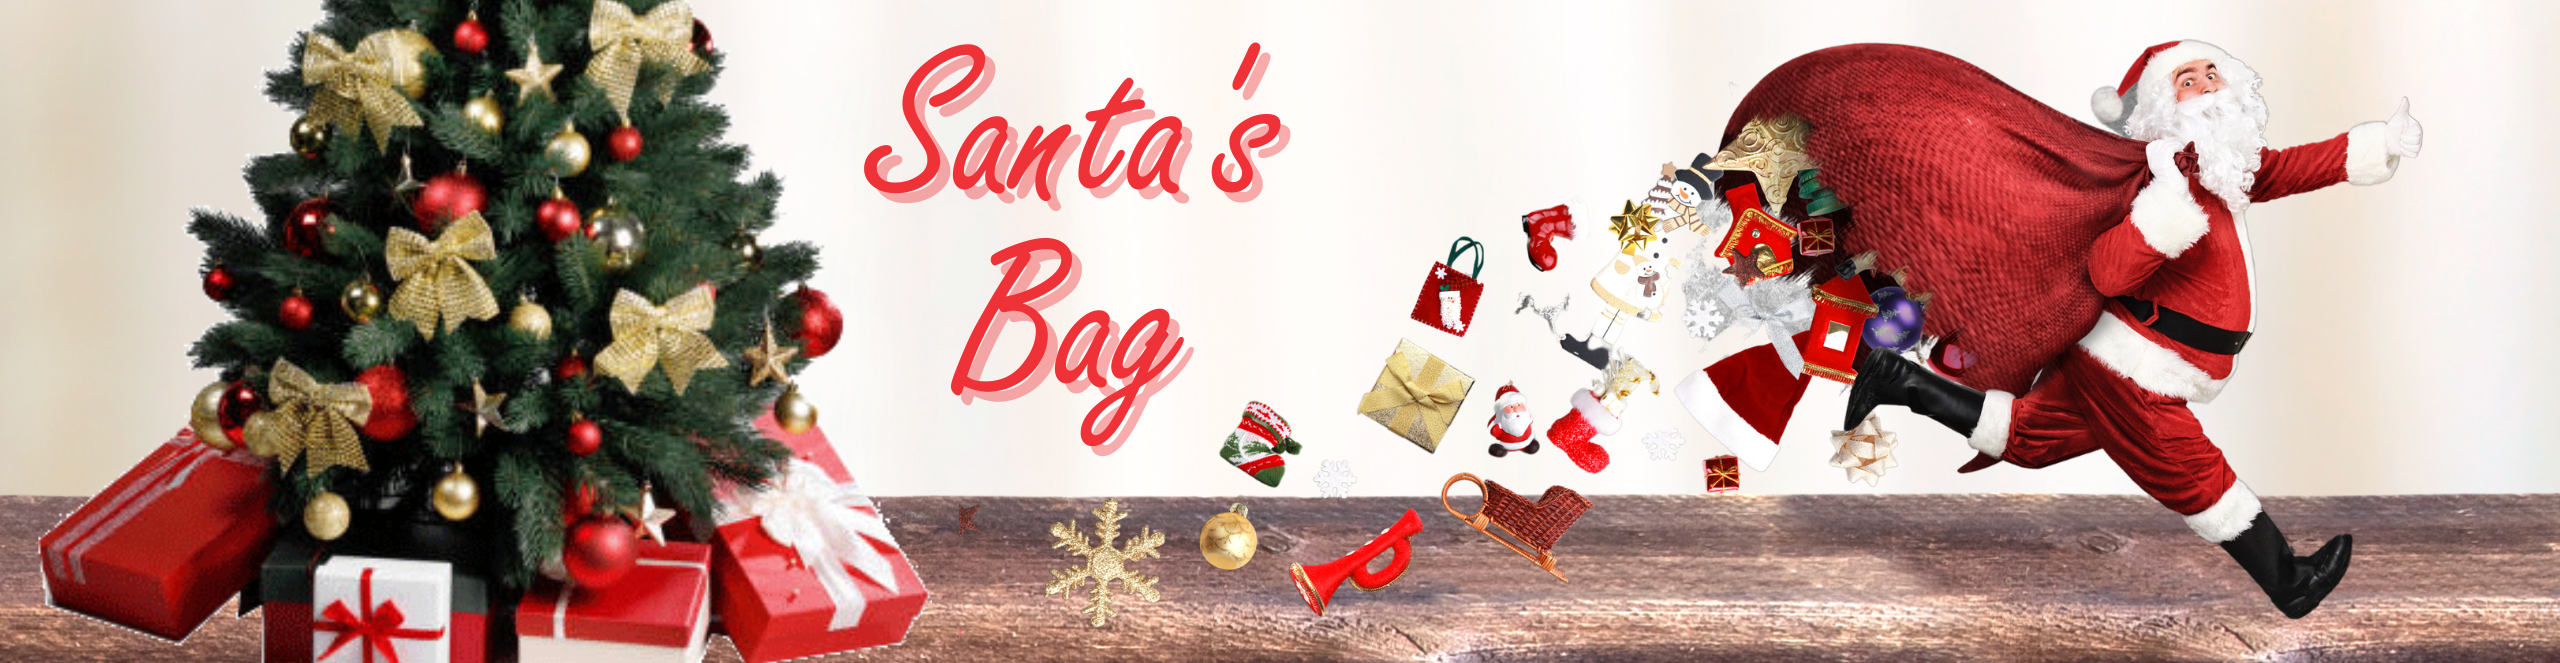 Featured image for “Santa’s Bag”